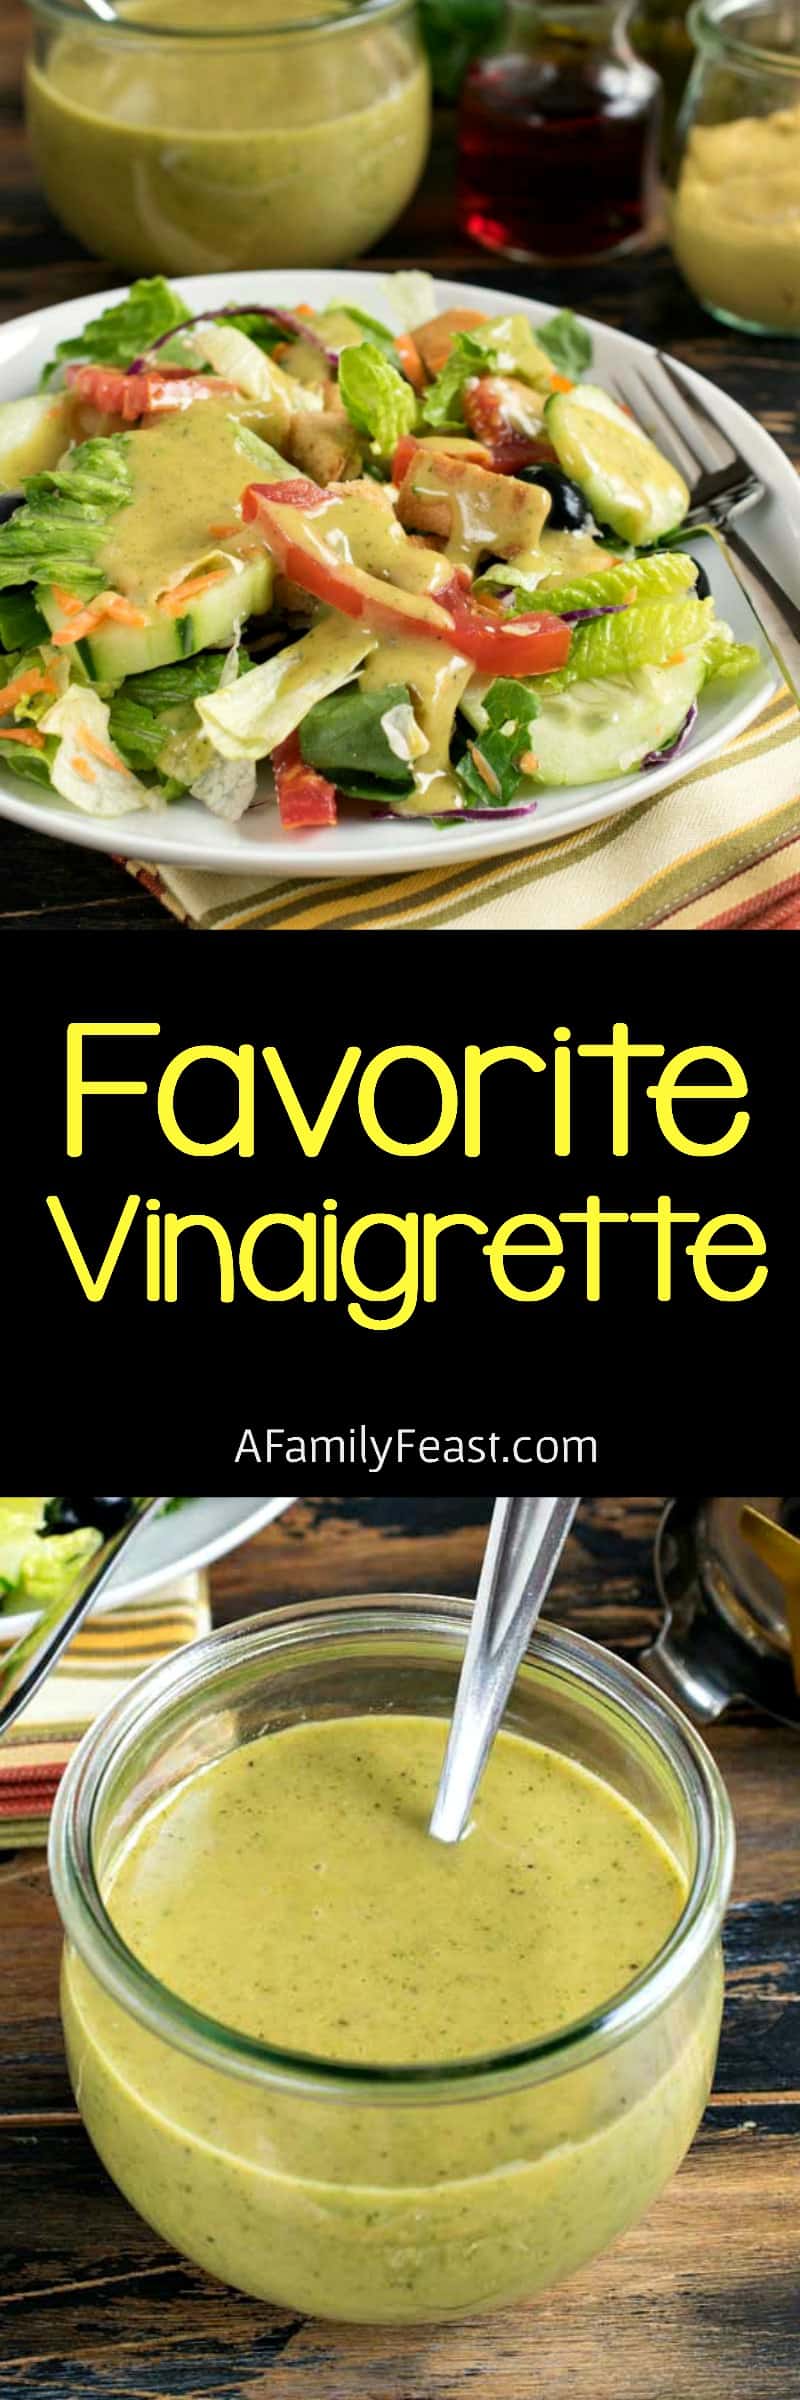 Our Favorite Vinaigrette is a versatile, delicious salad dressing that everyone should have in their recipe collection!